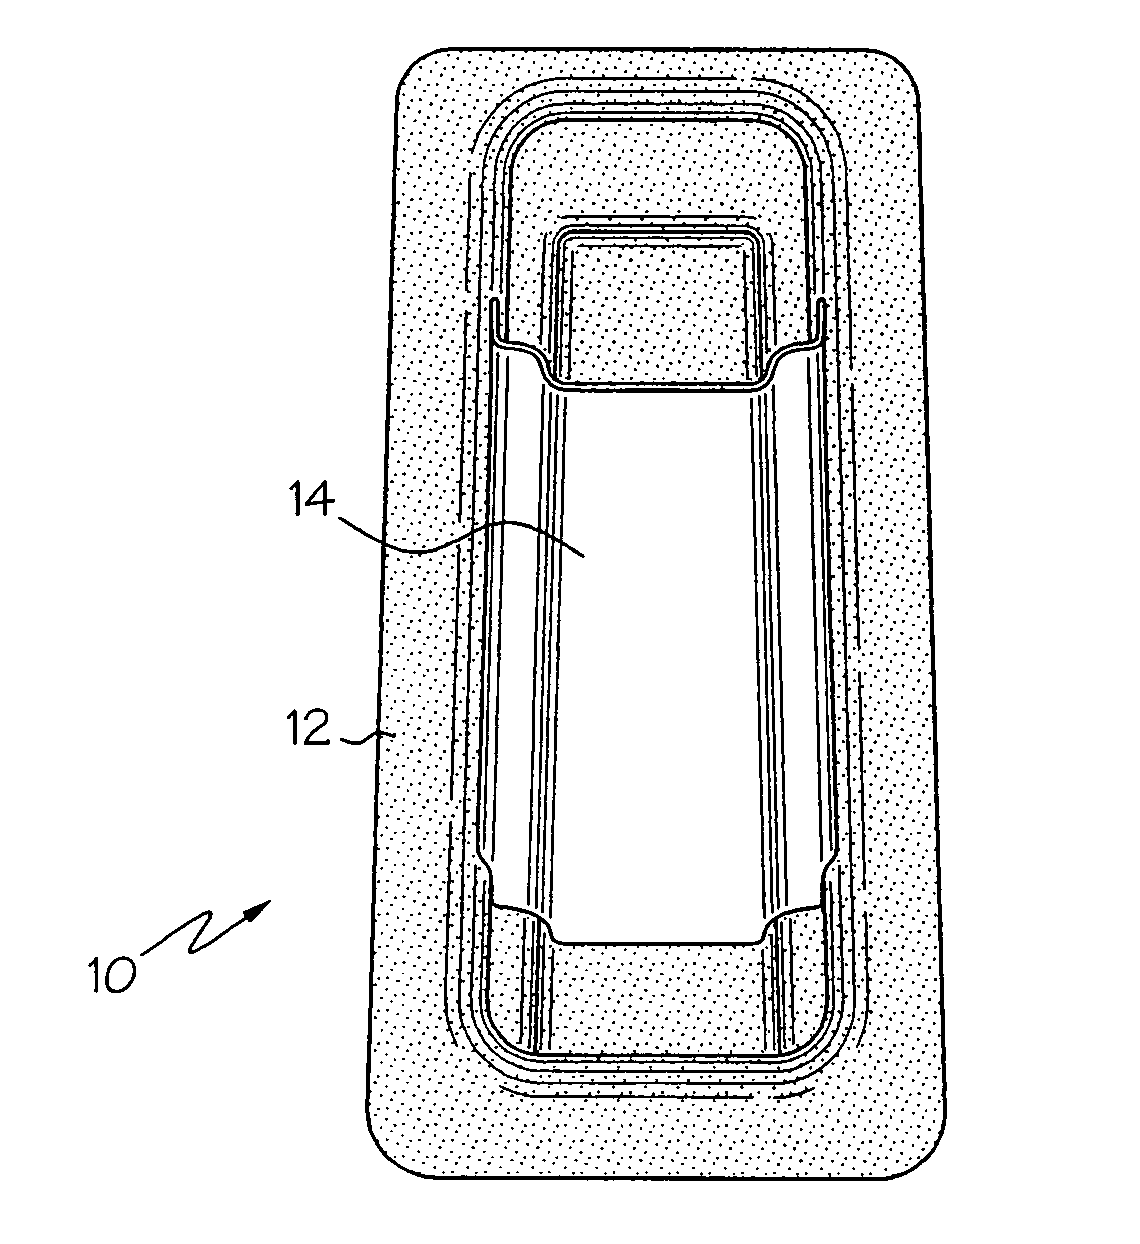 Method of providing flow control of heat activated sealant using a combination sealant/flow control agent